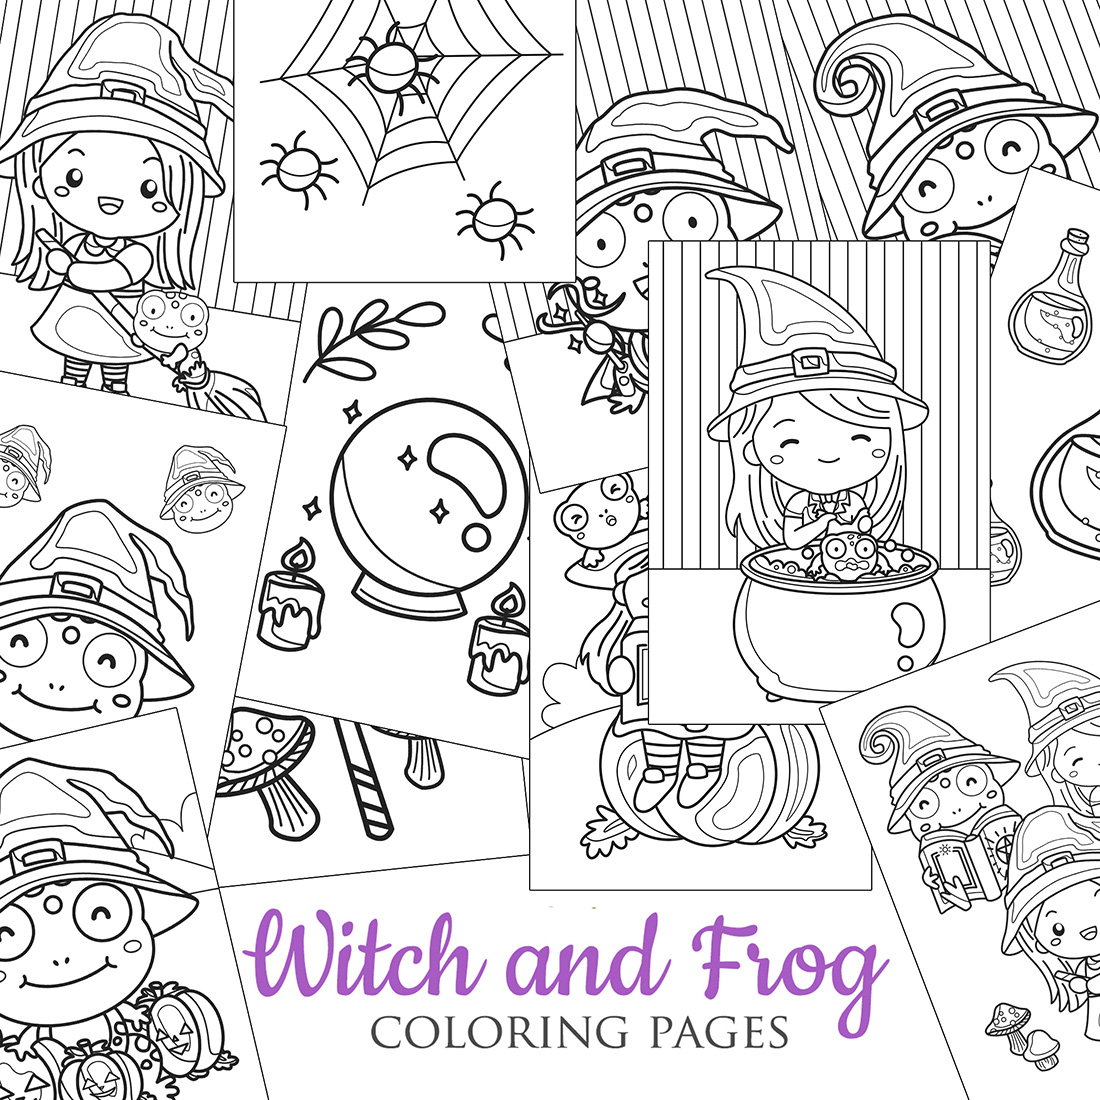 Cute halloween kids witch costume and frog animal cartoon coloring for kids and adult activity